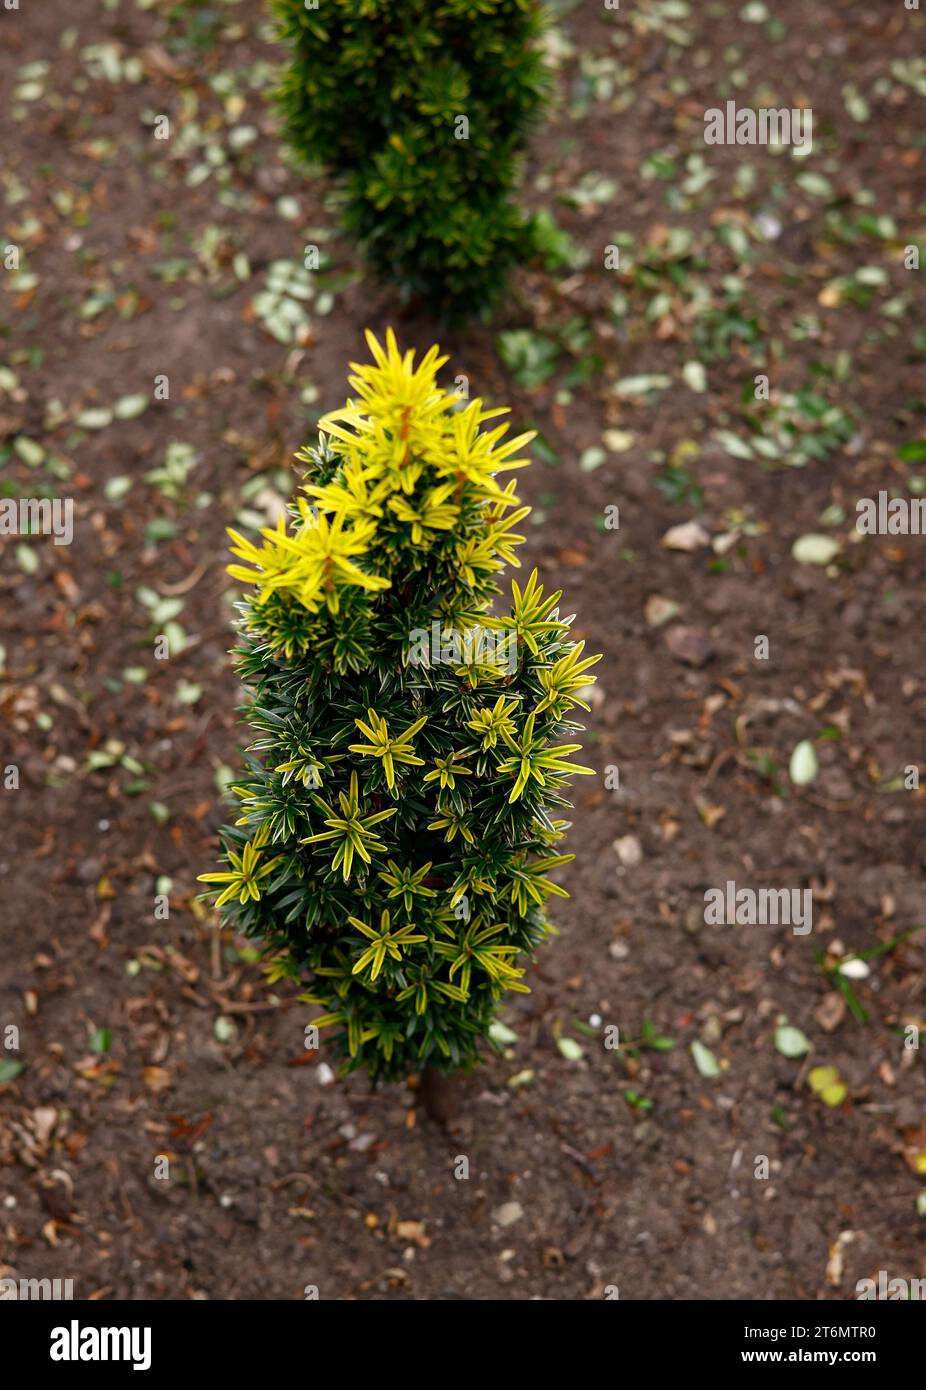 Closeup of the yellow and green leaves of the evergreen slow and miniature growing hardy perennial garden plant taxus baccata icicle. Stock Photo